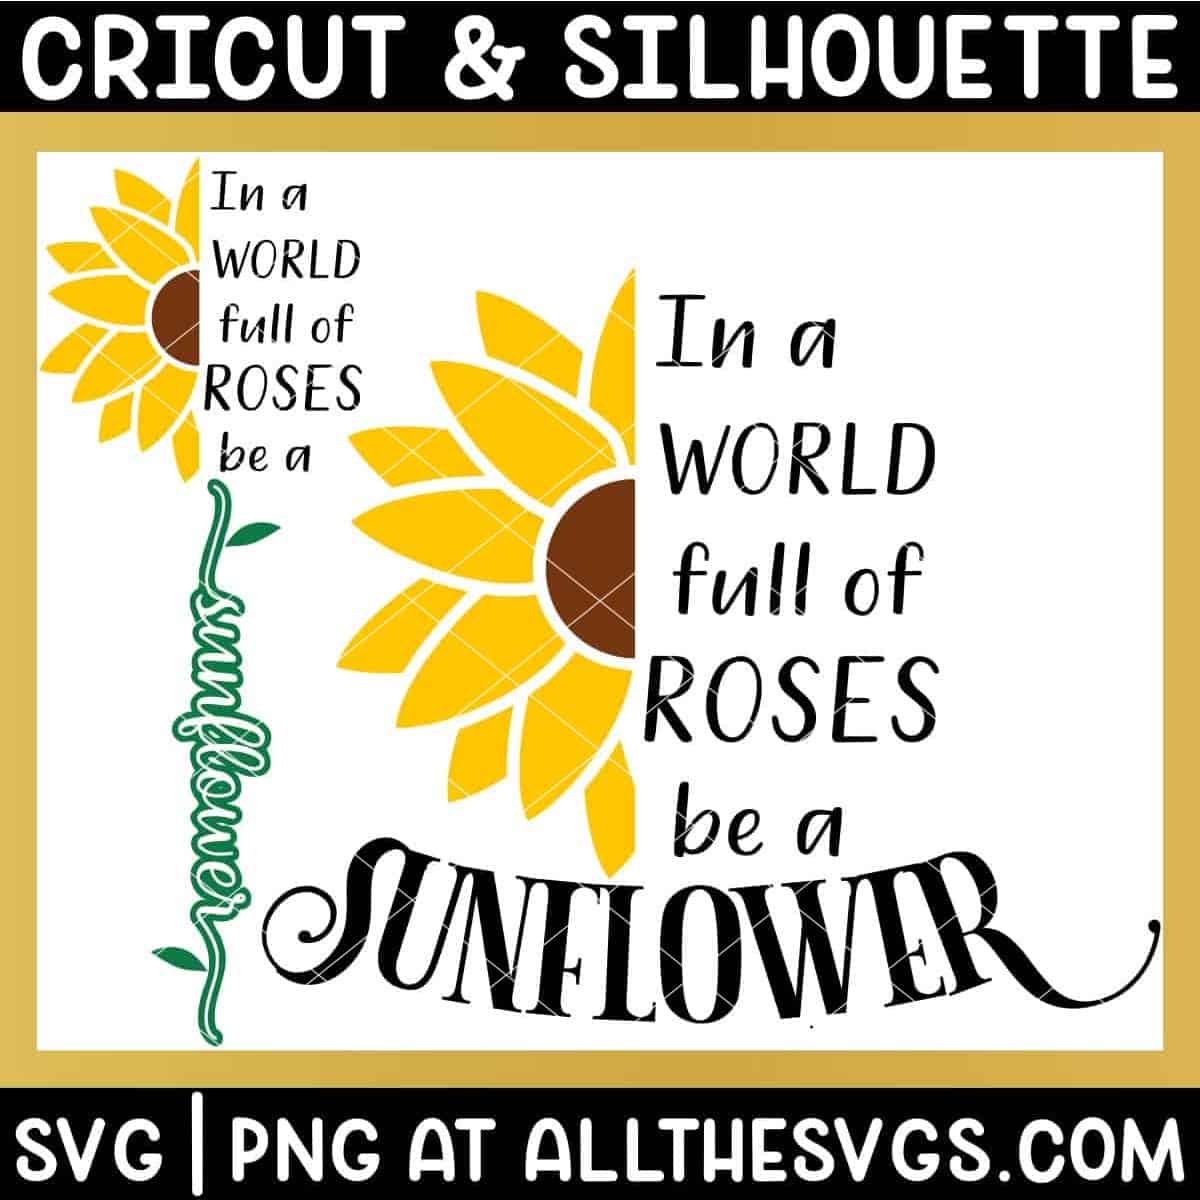 in a world full of roses, be a sunflower svg png with half sunflower.